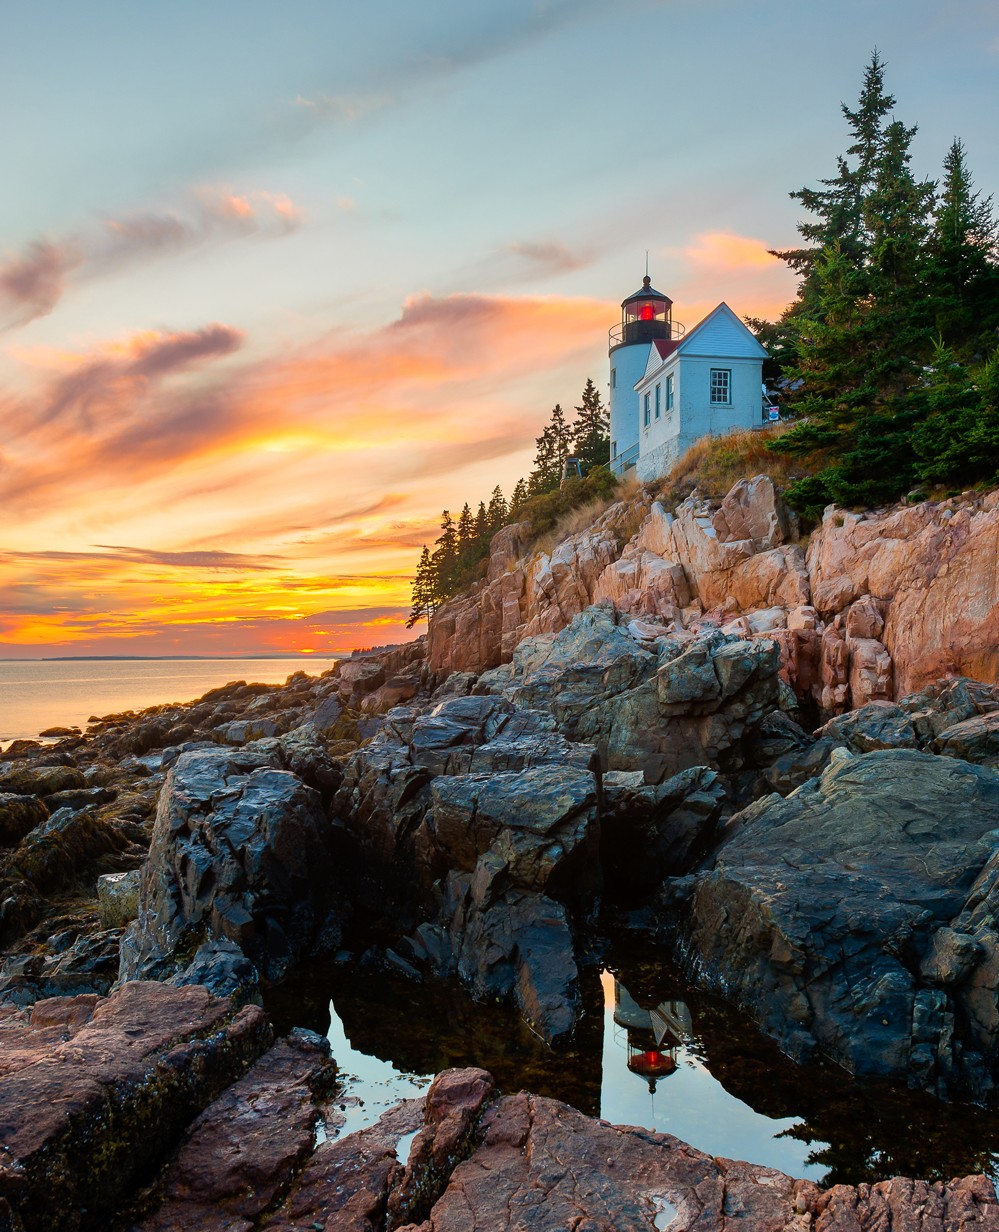 Built in 1858, Maine’s Bass Harbor Head Light perches atop the rocky southern shore of Mount Desert Island; today it’s part of Acadia National Park. Although the tower and house are not open to the public, trails on either side offer spectacular views.